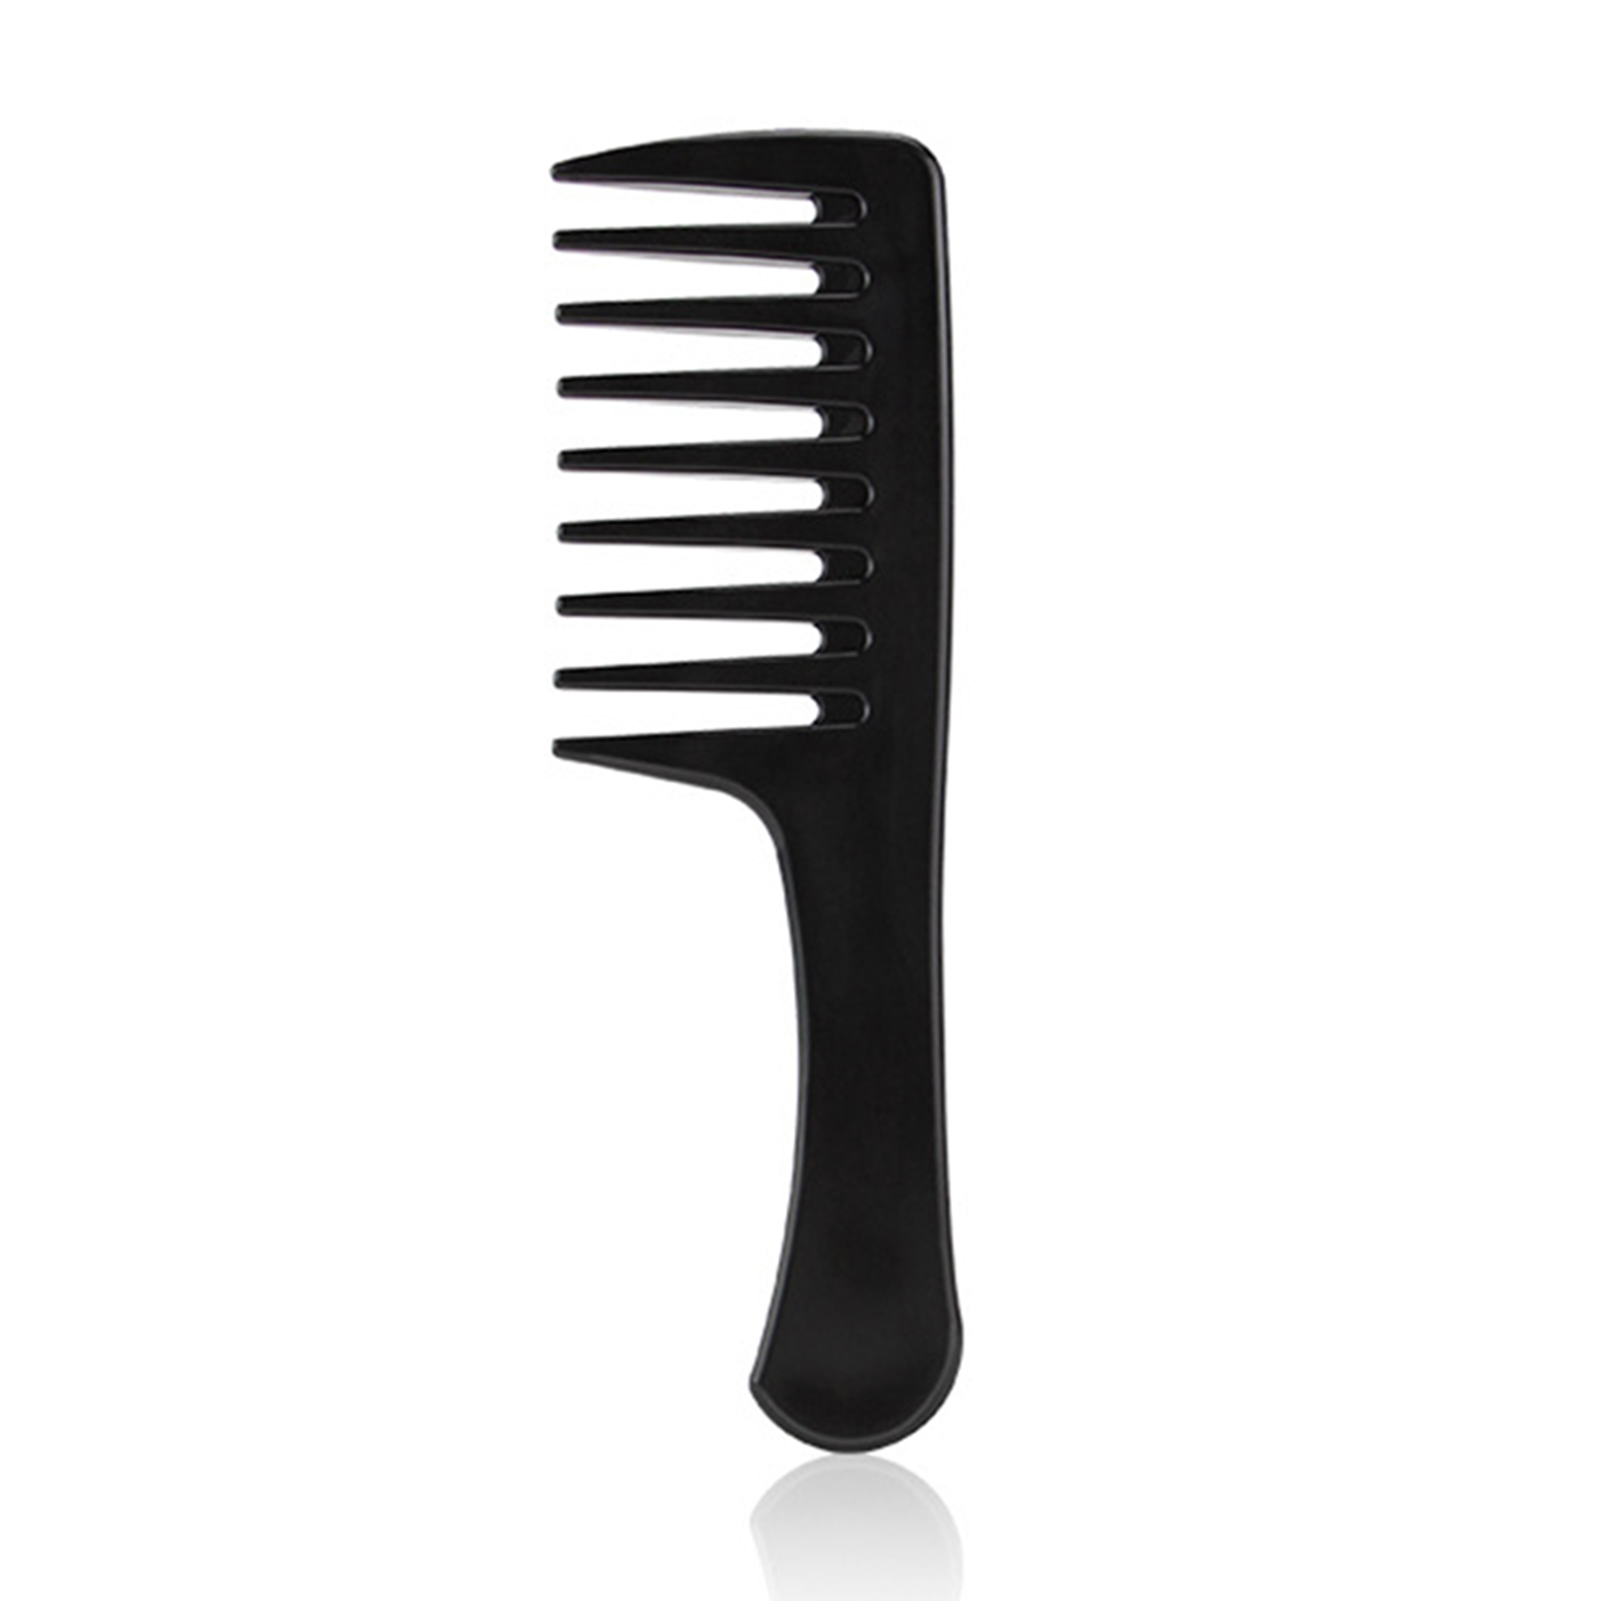 Smooth Hair Comb Plastic Household Candy Color Big Tooth Comb Black Wide Tooth Comb Durable Detangling Hair Brush Professional Handgrip Comb for Curly Hair Long Hair Wet Hair New - image 1 of 2